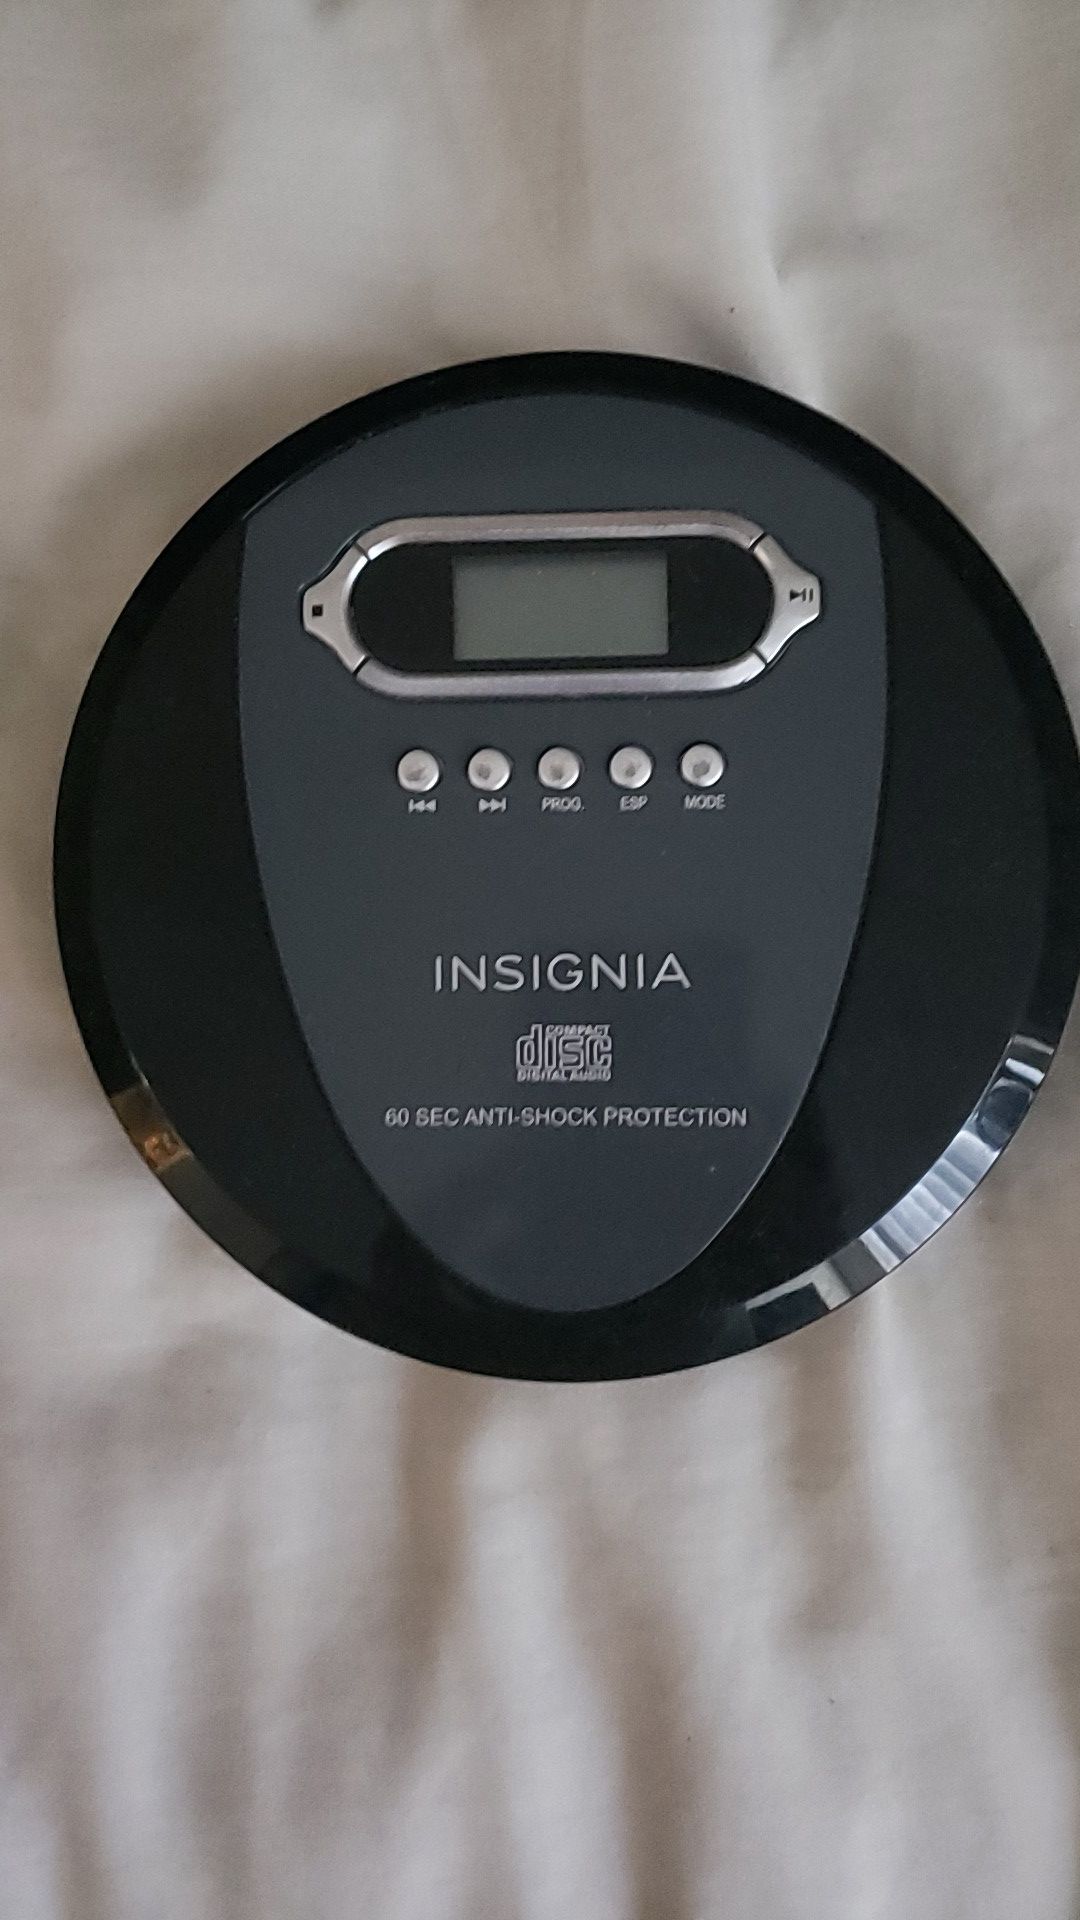 Insignia CD player (Rarely Used)